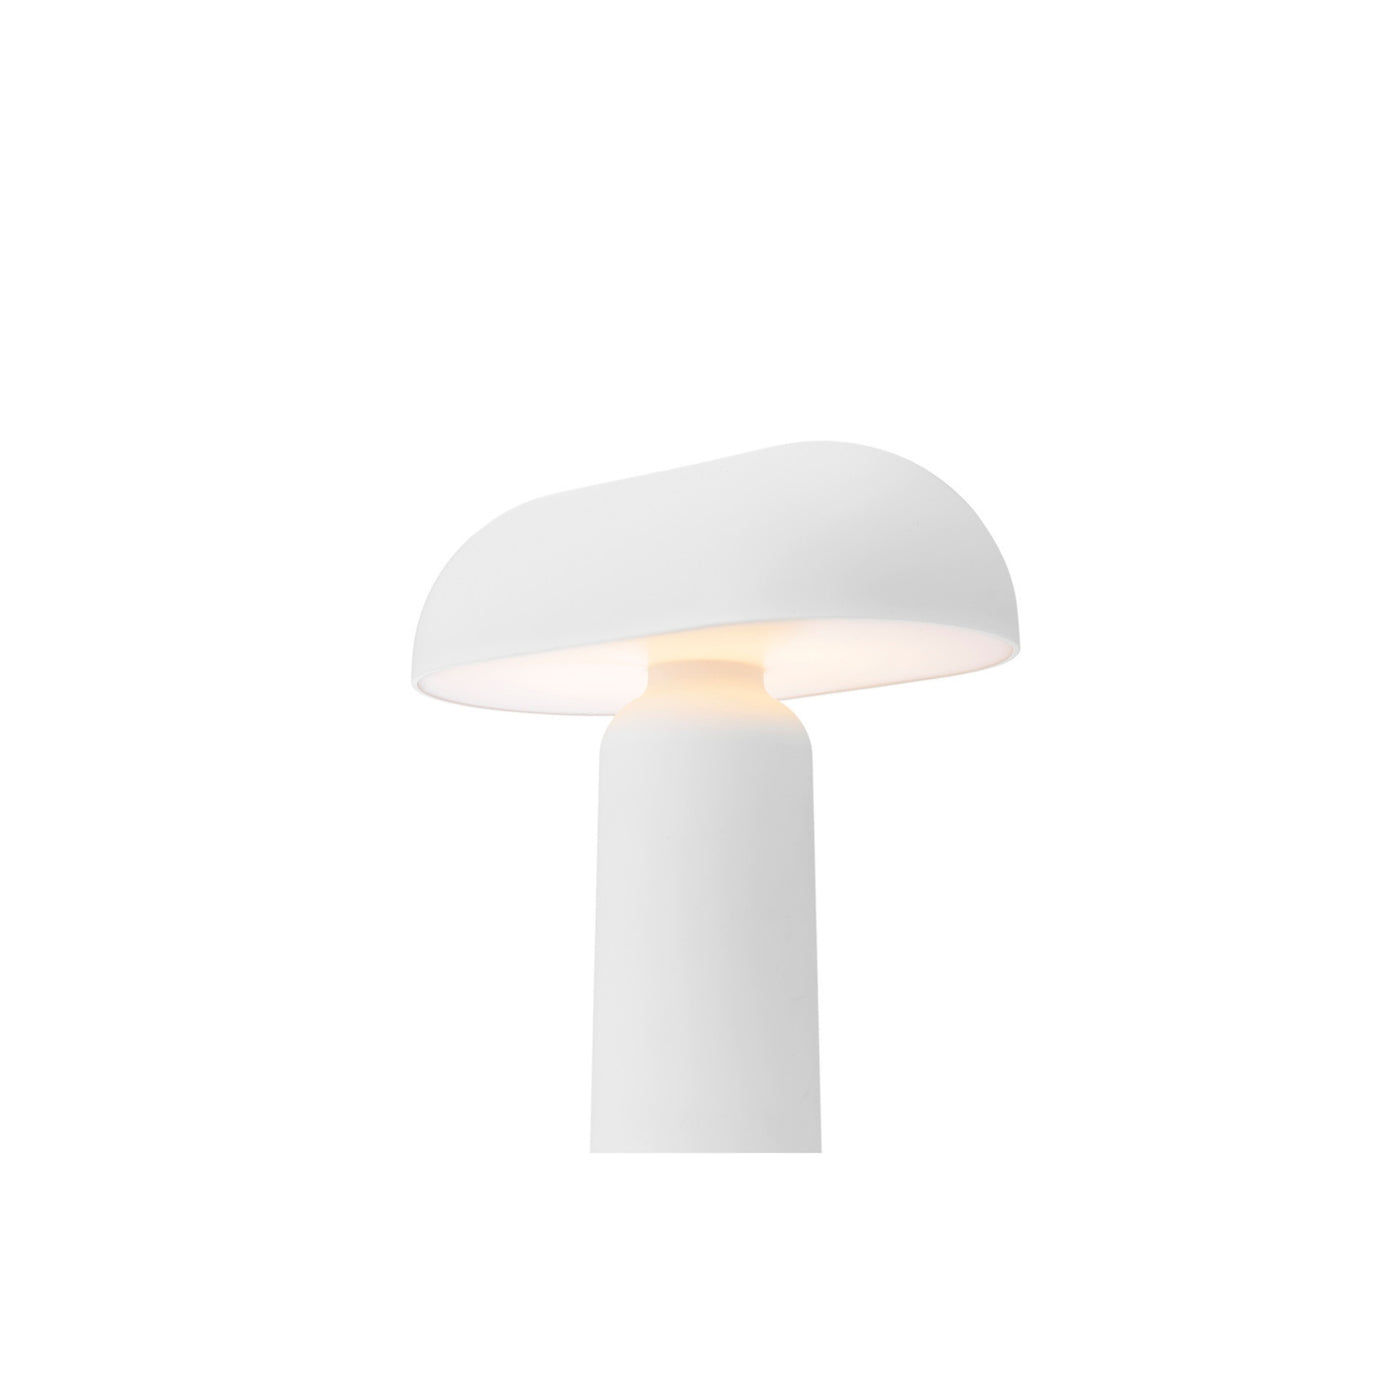 Normann Copenhagen Porta Table Lamp. Free UK delivery from someday designs. #colour_white